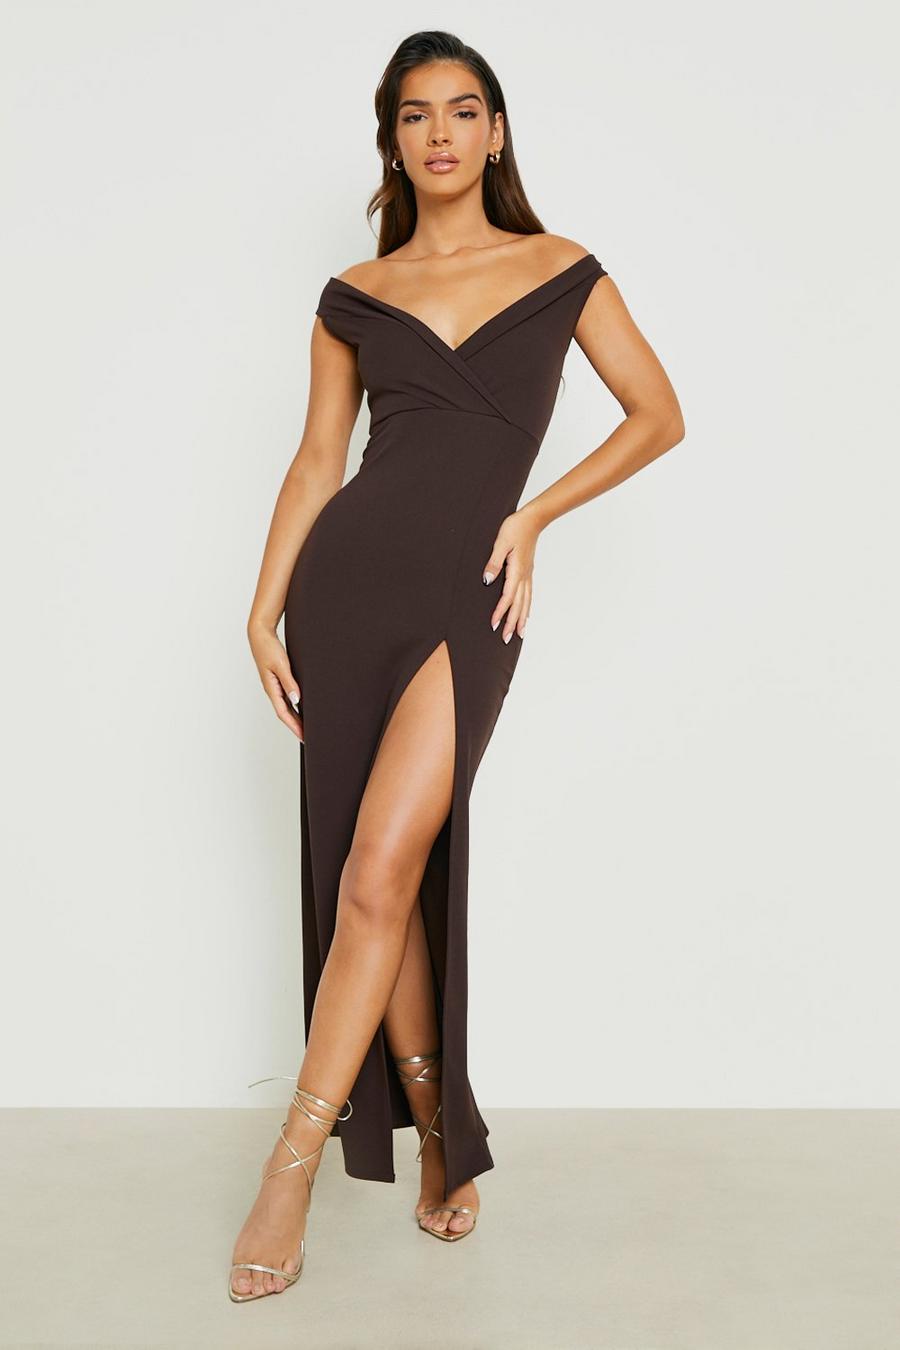 Chocolate brown Wrap Off The Shoulder Maxi Bridesmaid Dress